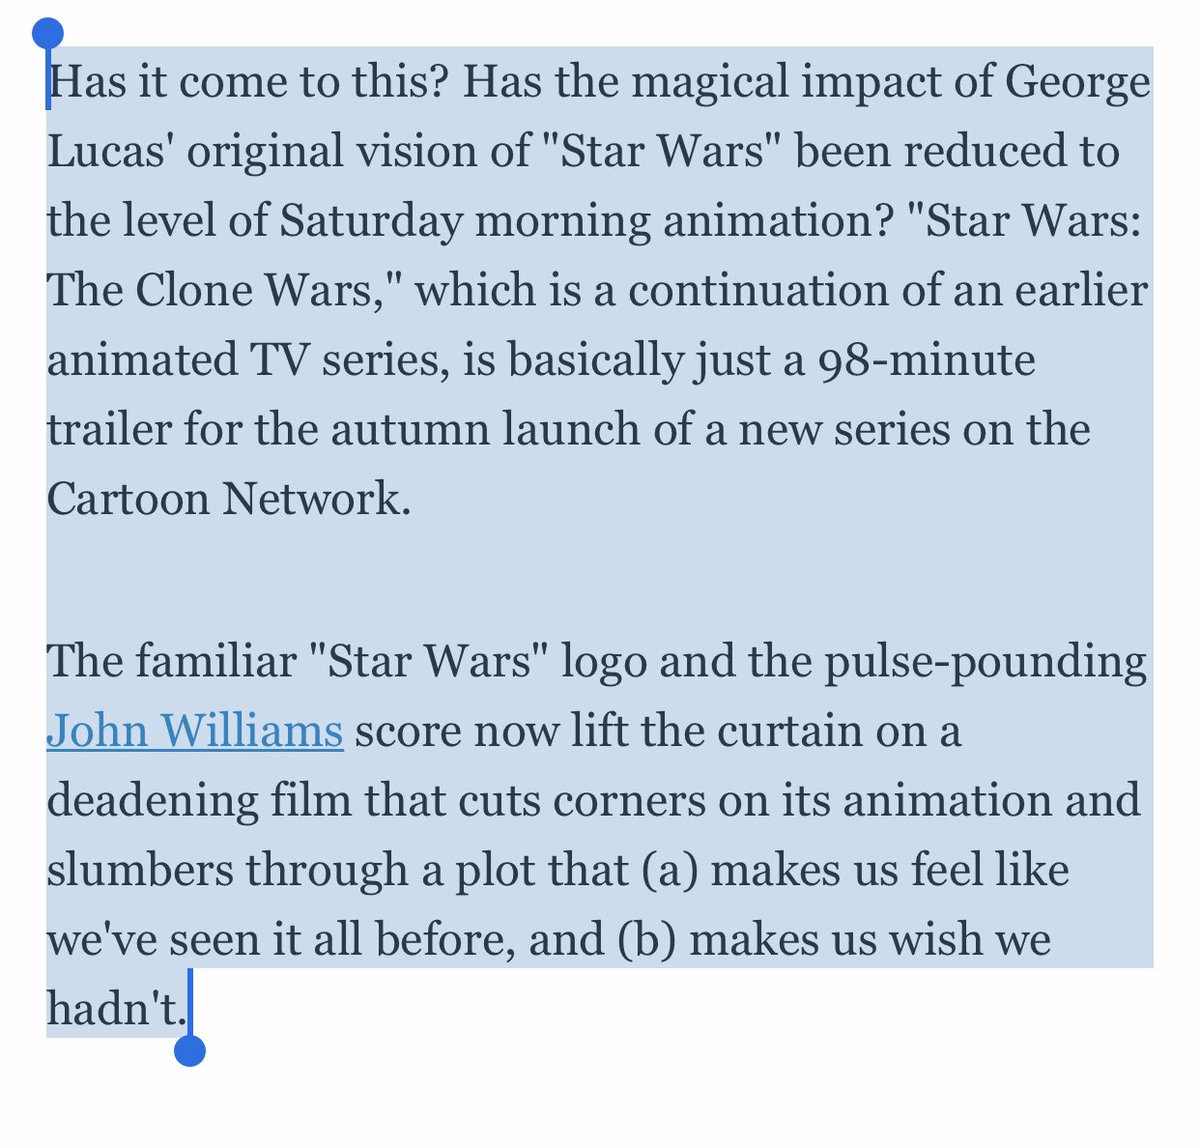 The movie was panned by critics. Hardcore fans were annoyed by the whiny little padawan. Even the animation was criticized as wooden and odd and was used to continue the attack on the prequels, which George had just completed. Roger Ebert wasn’t kind: